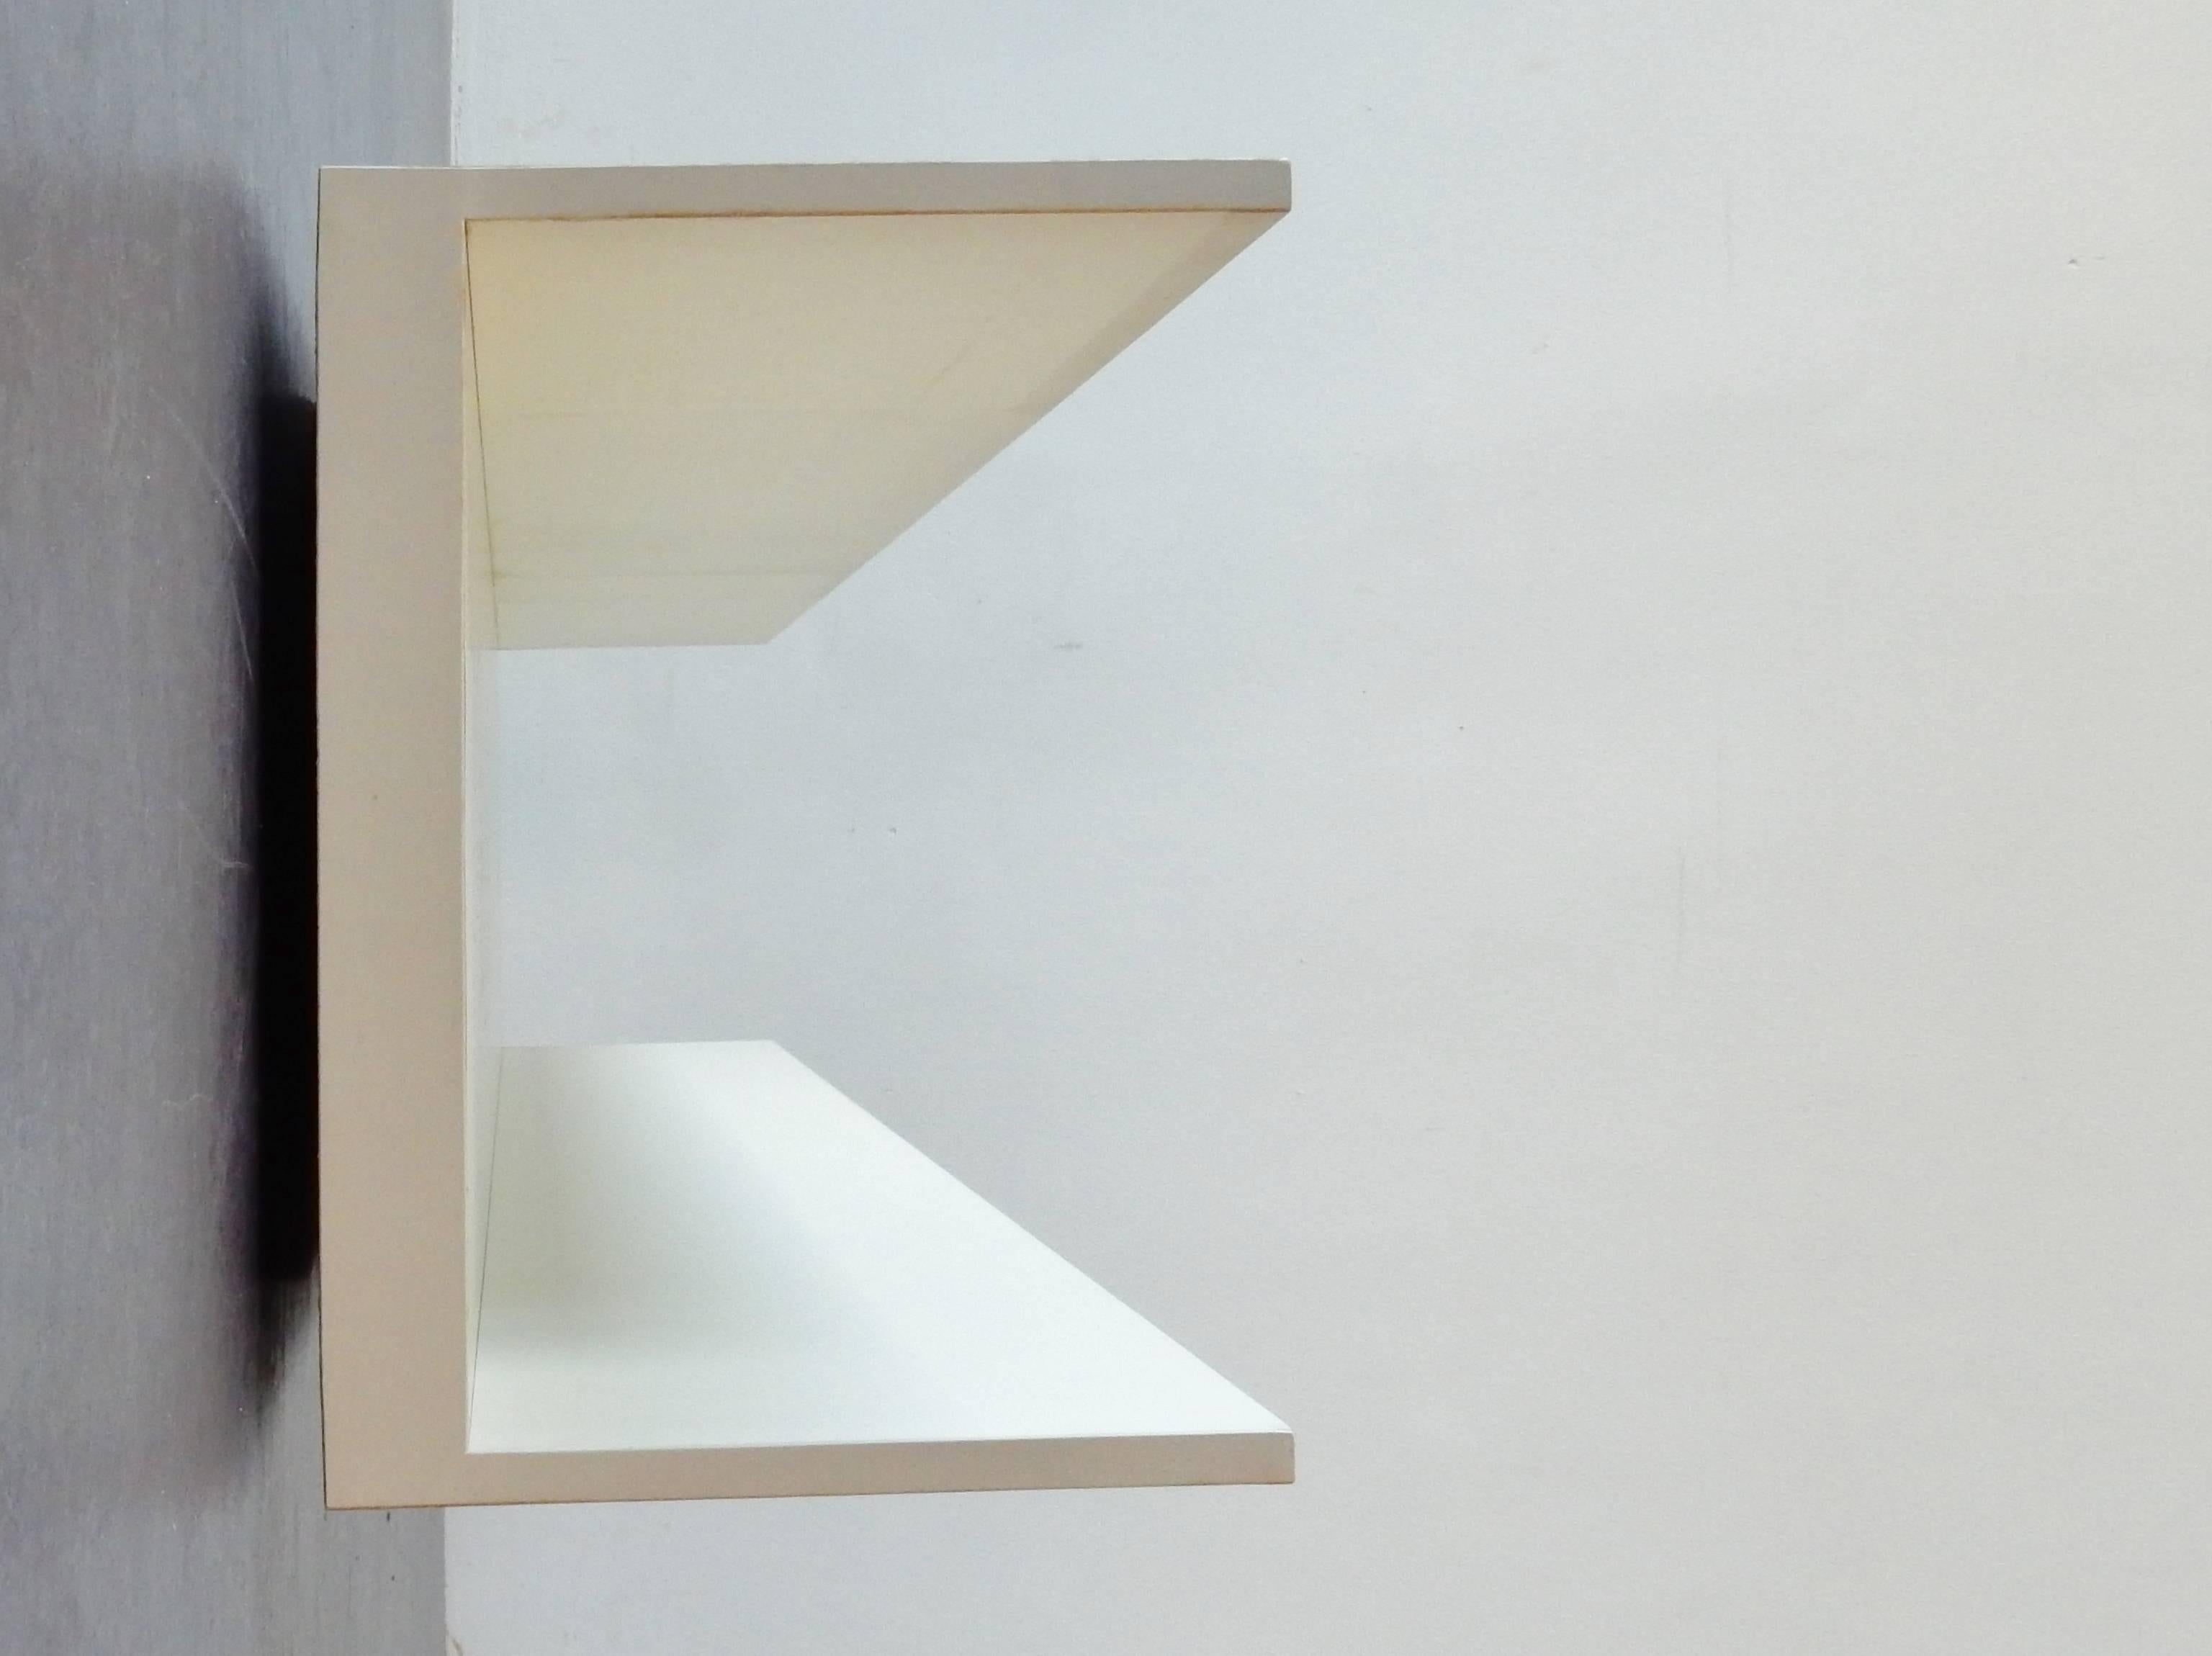 Very good-looking set of two white laminated bookshelves. A design by Walter Wirz for Wilhelm Renz. German modernist design, simple and elegant. Both are in a very good condition with some signs of age. Price is for the set of two shelves.